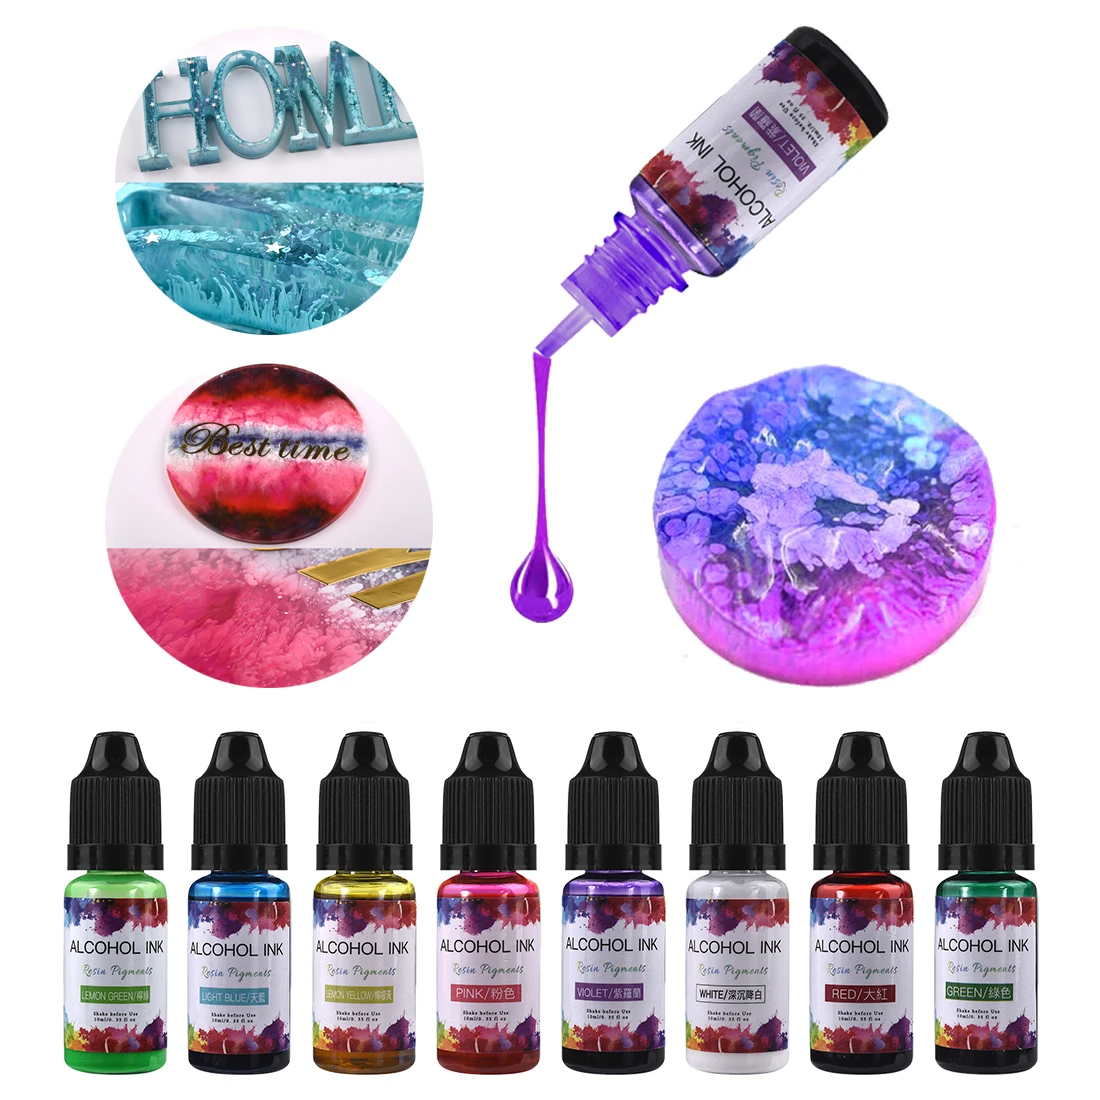 10ml/15ml Art Ink Alcohol Resin Pigment Liquid Colorant Dye Ink Diffusion For UV Epoxy Resin DIY Jewelry Making 24 Colors